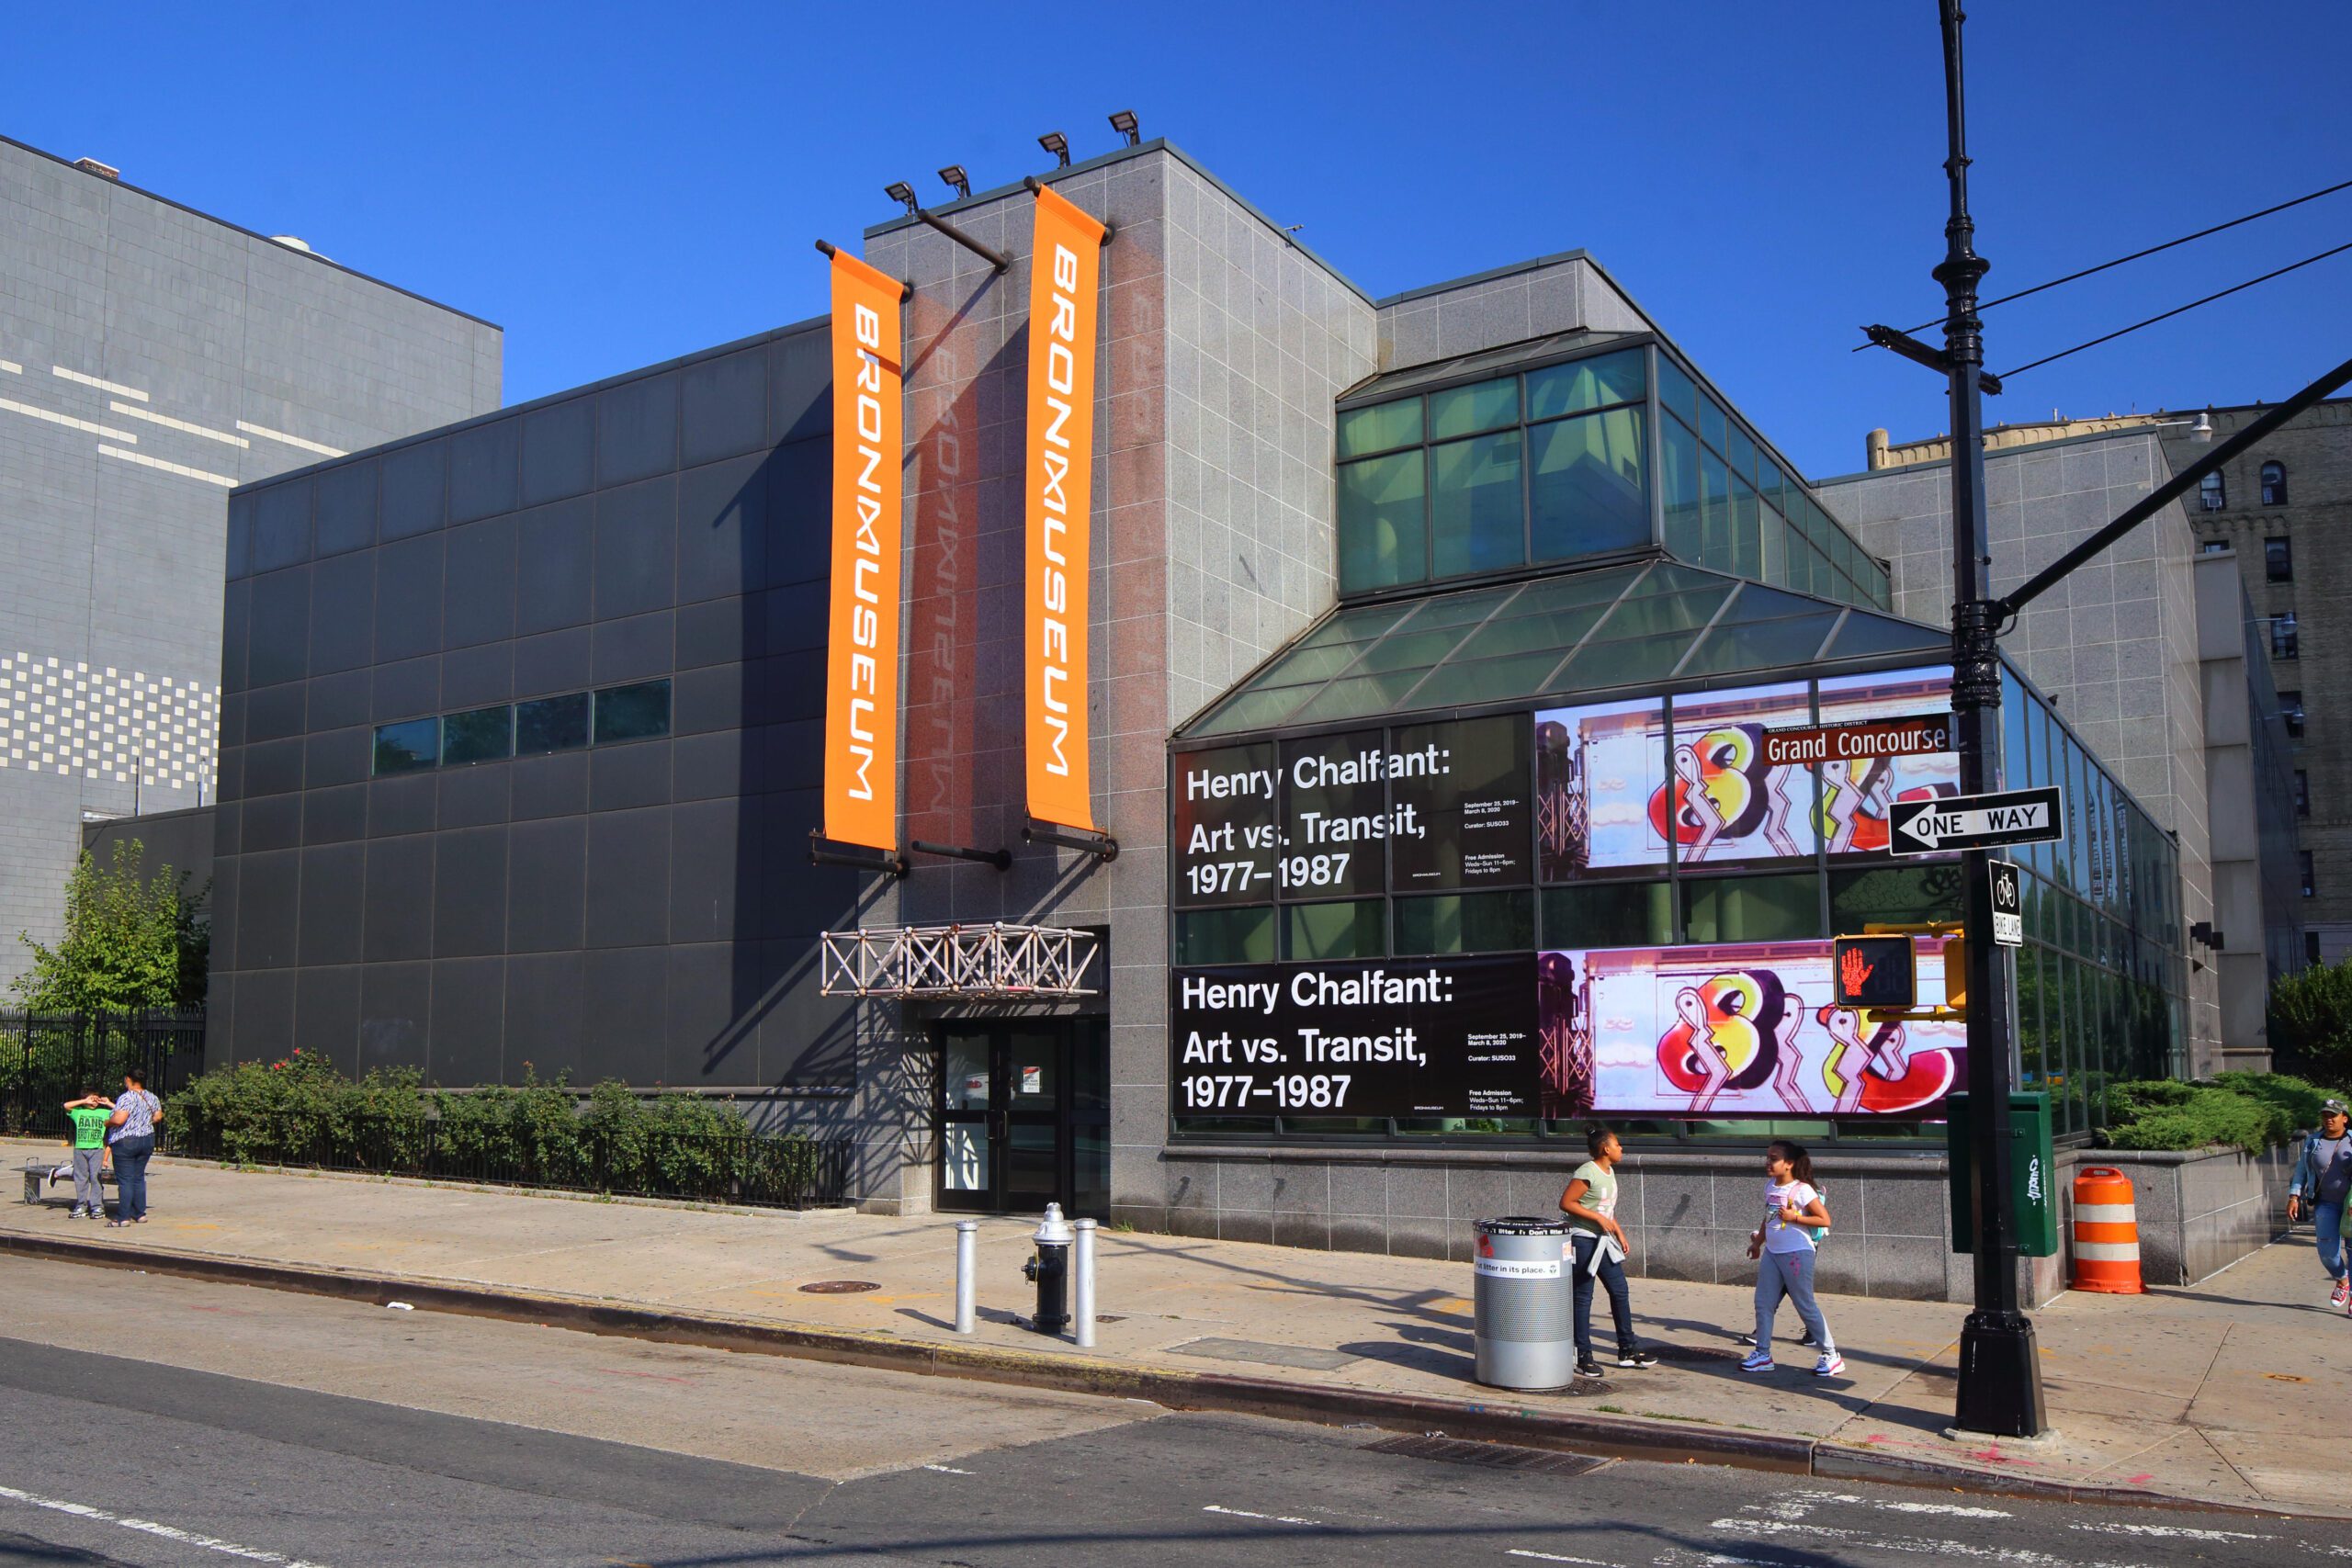 The Bronx Museum of the Arts, 1040 Grand Concourse, Bronx, NY. Robert K. Chin - Storefronts / Alamy Stock Photo